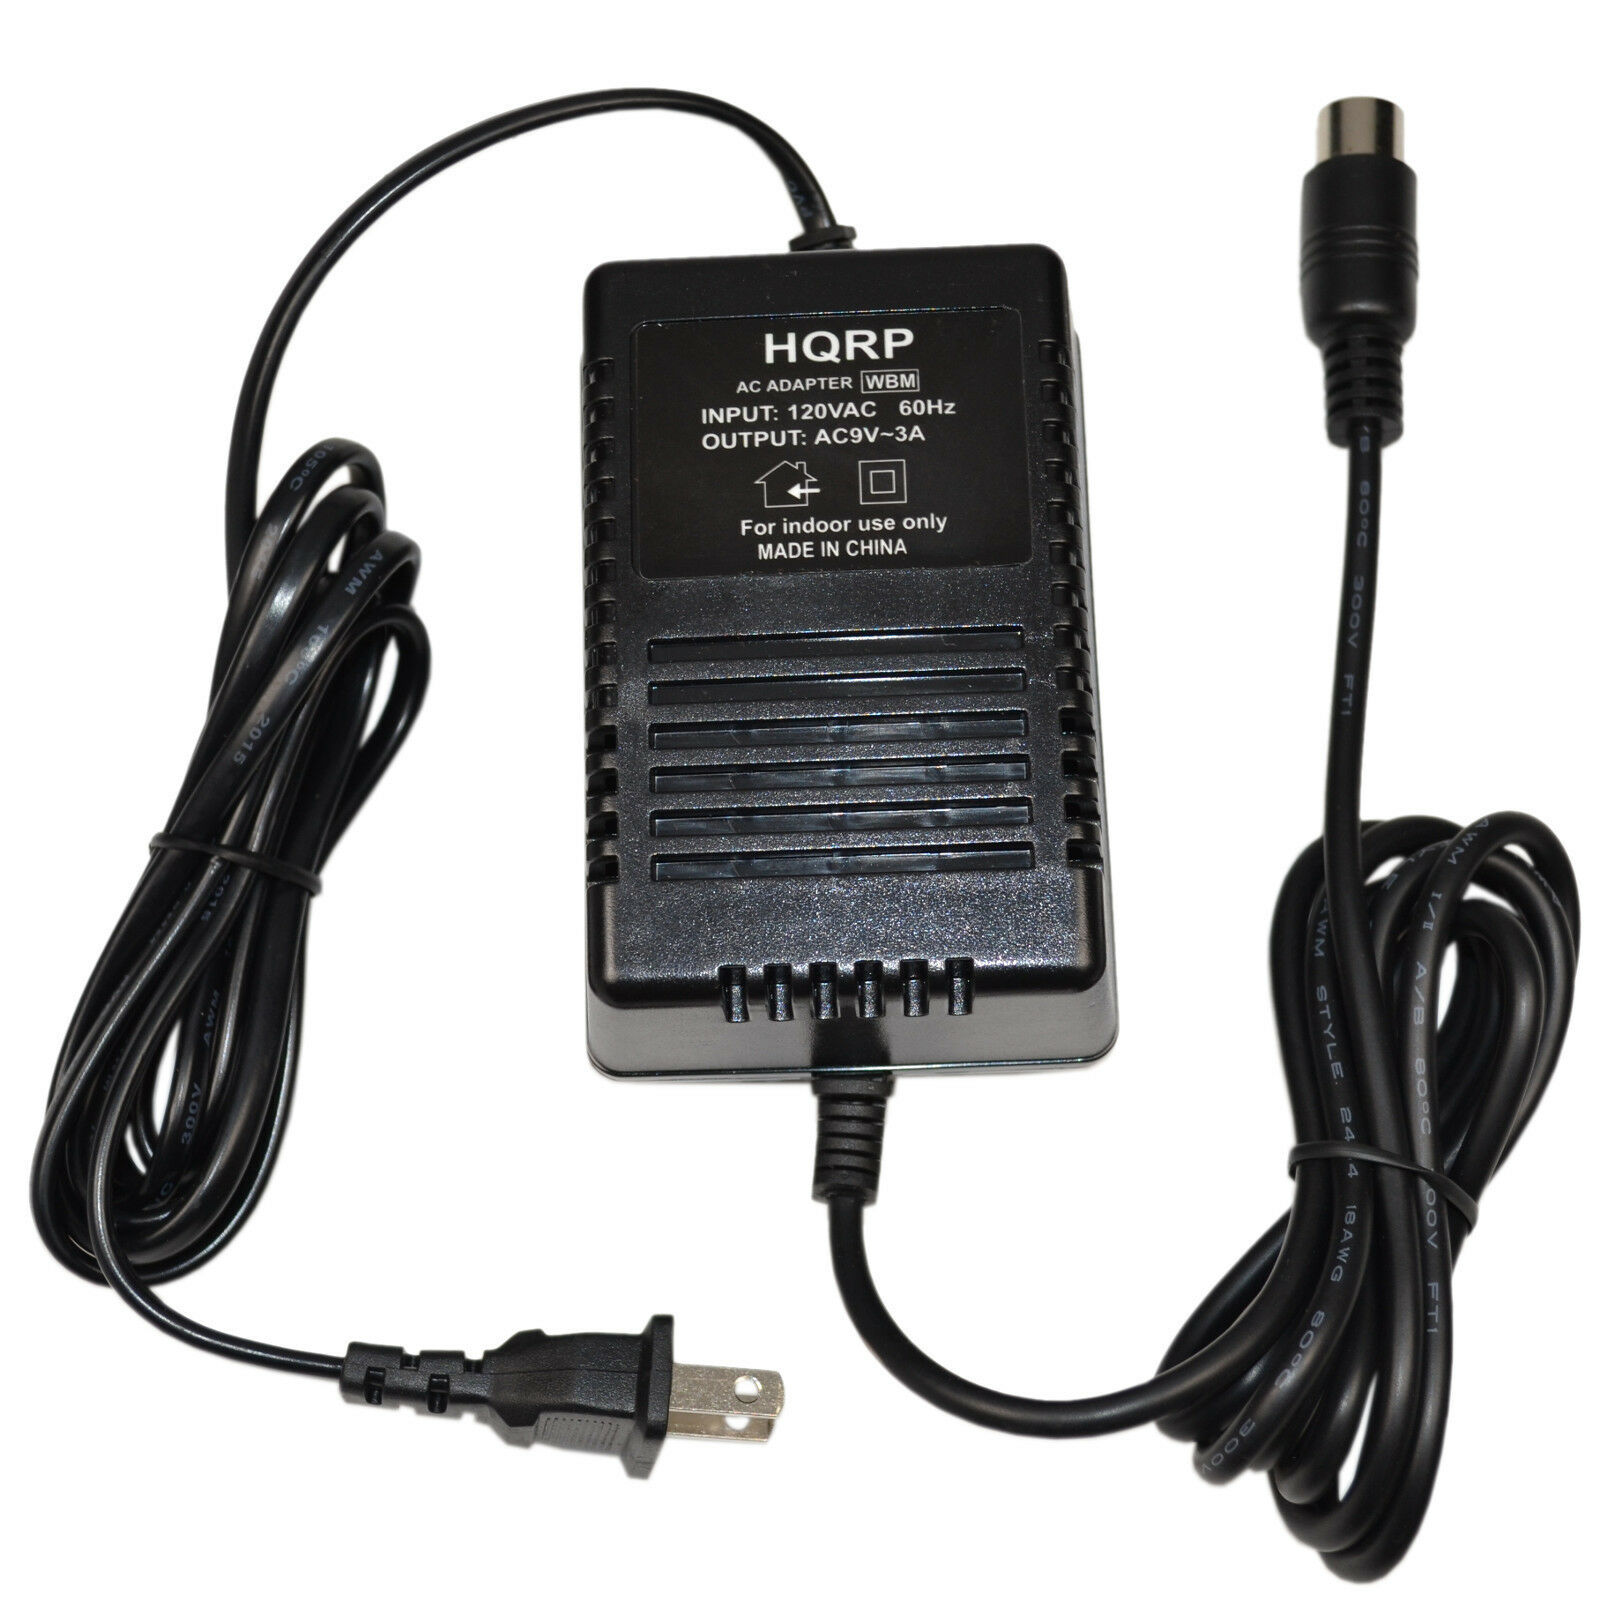 9V 4 PIN AC Power Adapter for Digitech PS0912 RP5 RP6 RP7 RP10 RP12 RP14D RP2000 Compatible Brand: For Digitech Comp